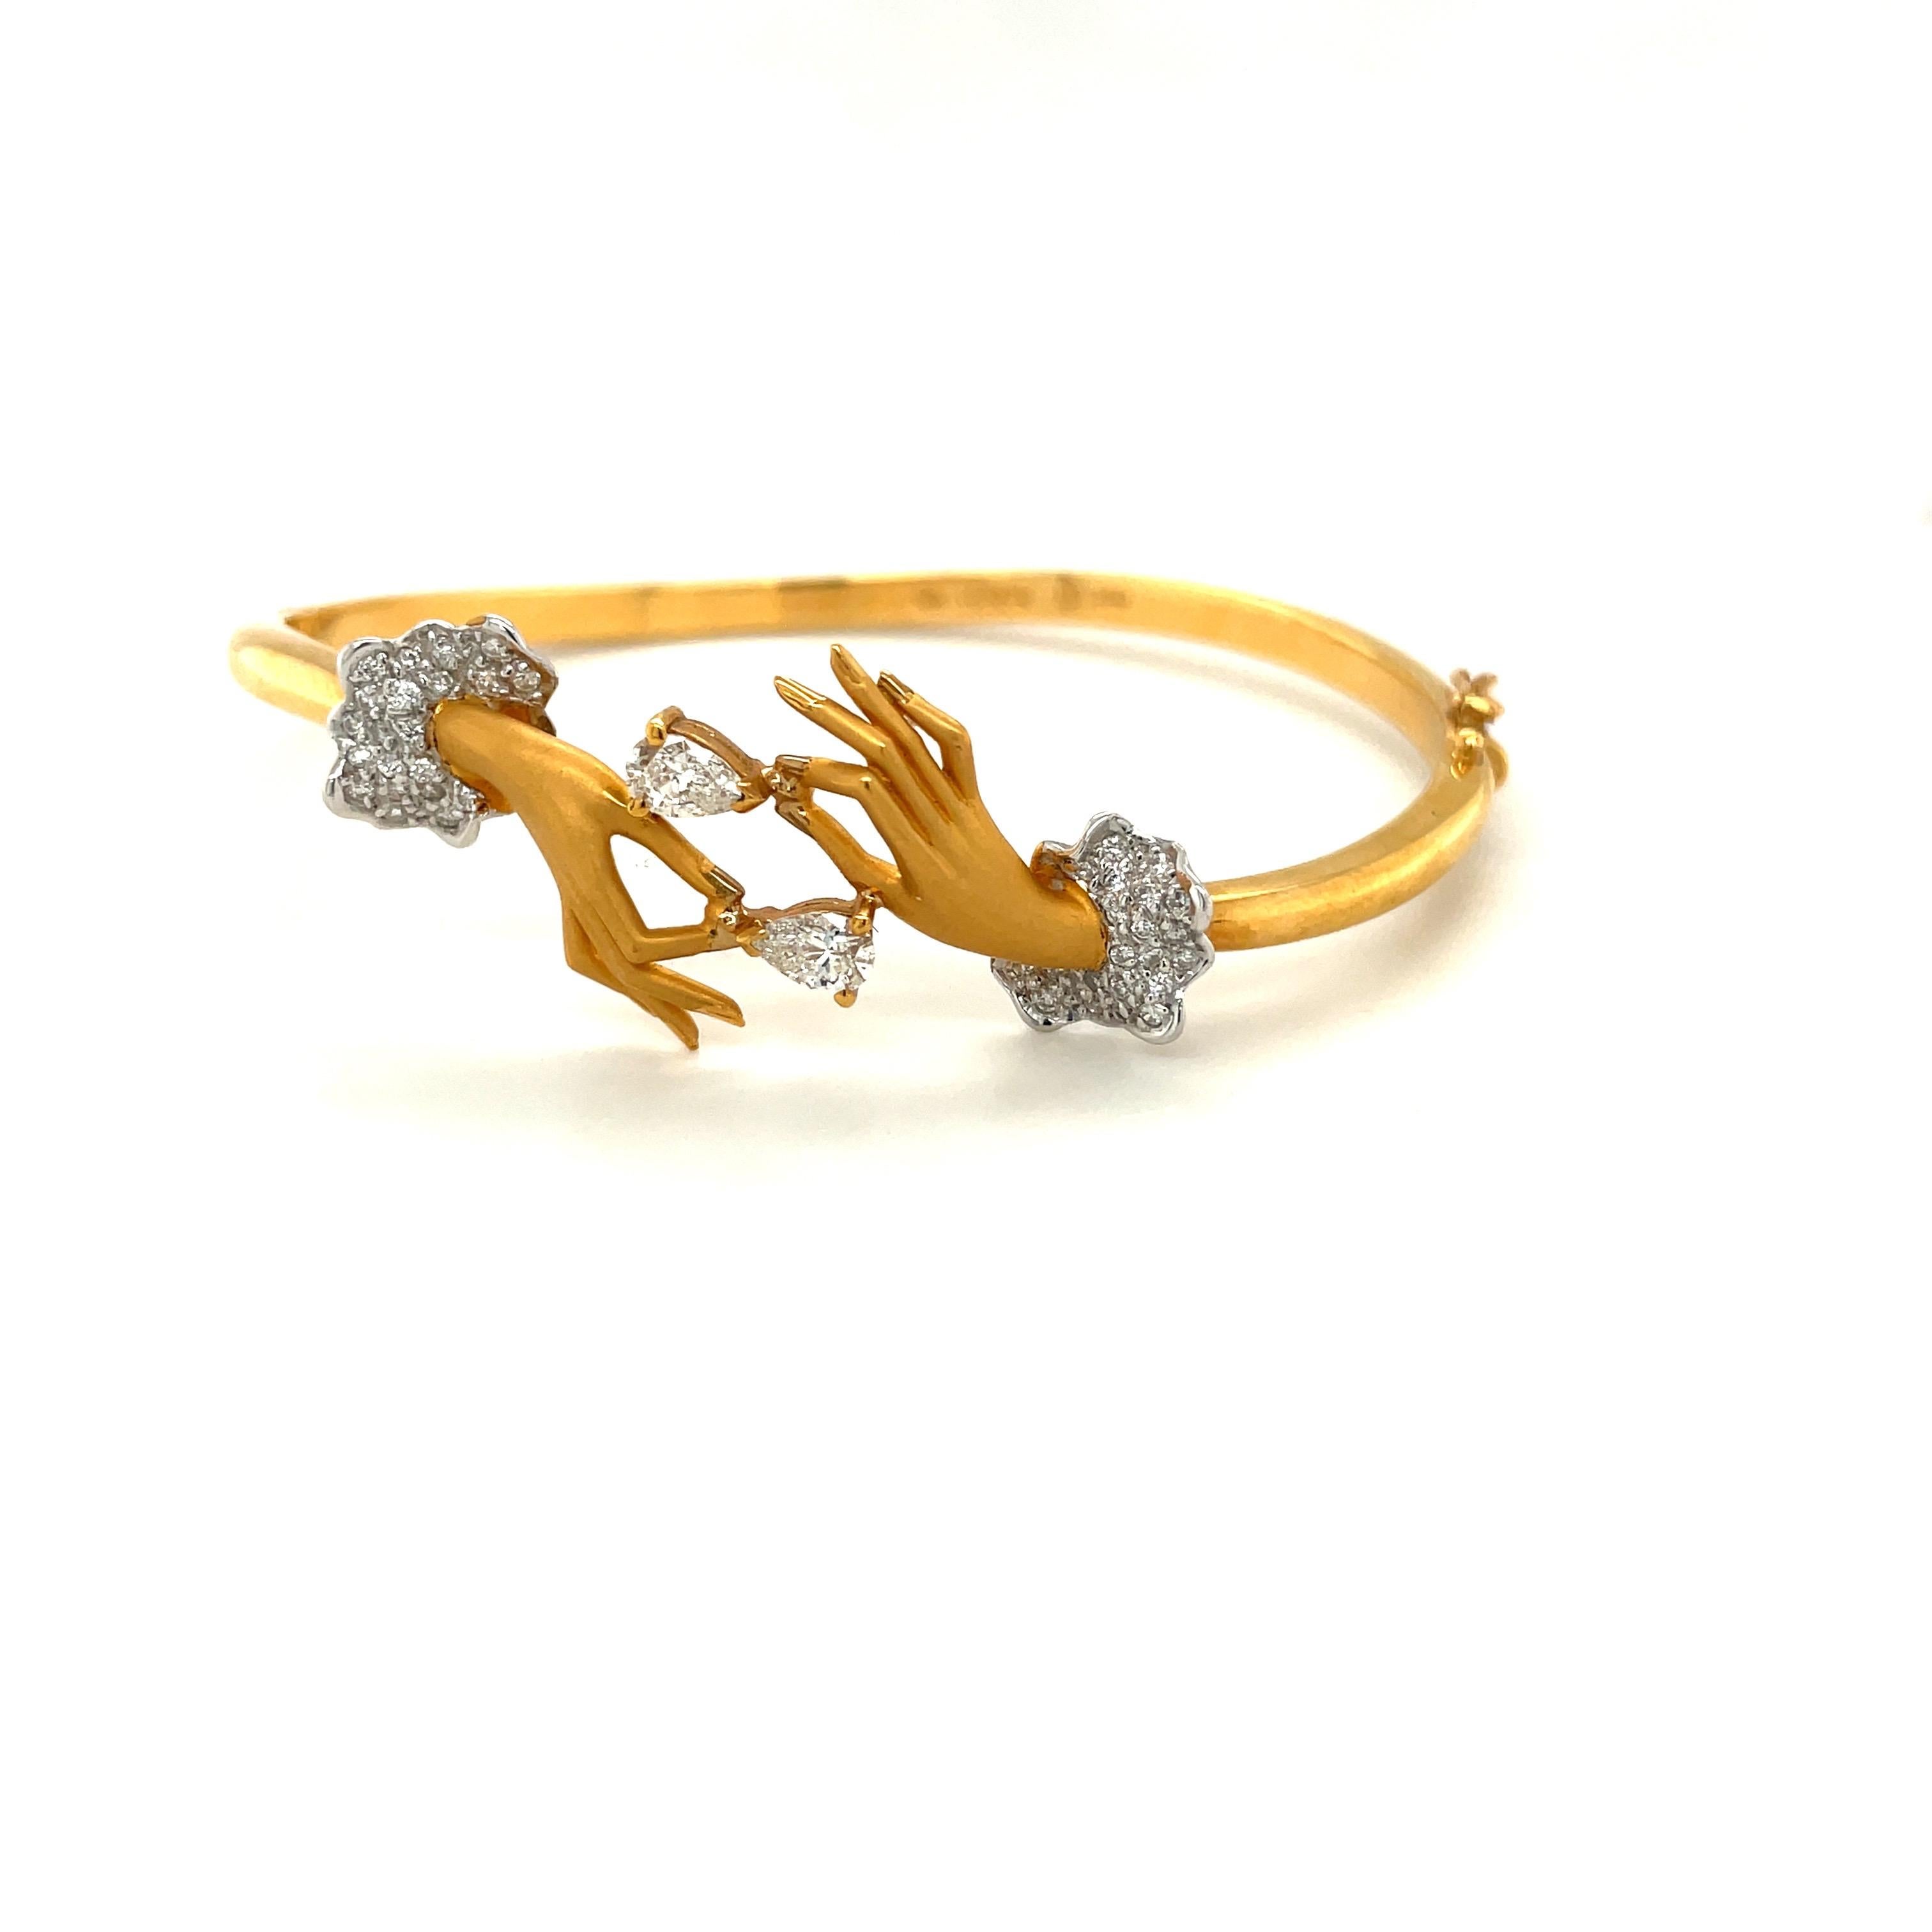 Carrera Y Carrera has built its its famous name on figurative designs, an obsession with surface finishes, and a compelling way of seeing beauty in art and nature.
This 18 karat yellow gold bracelet is a perfect example of Carrera's iconic designs.